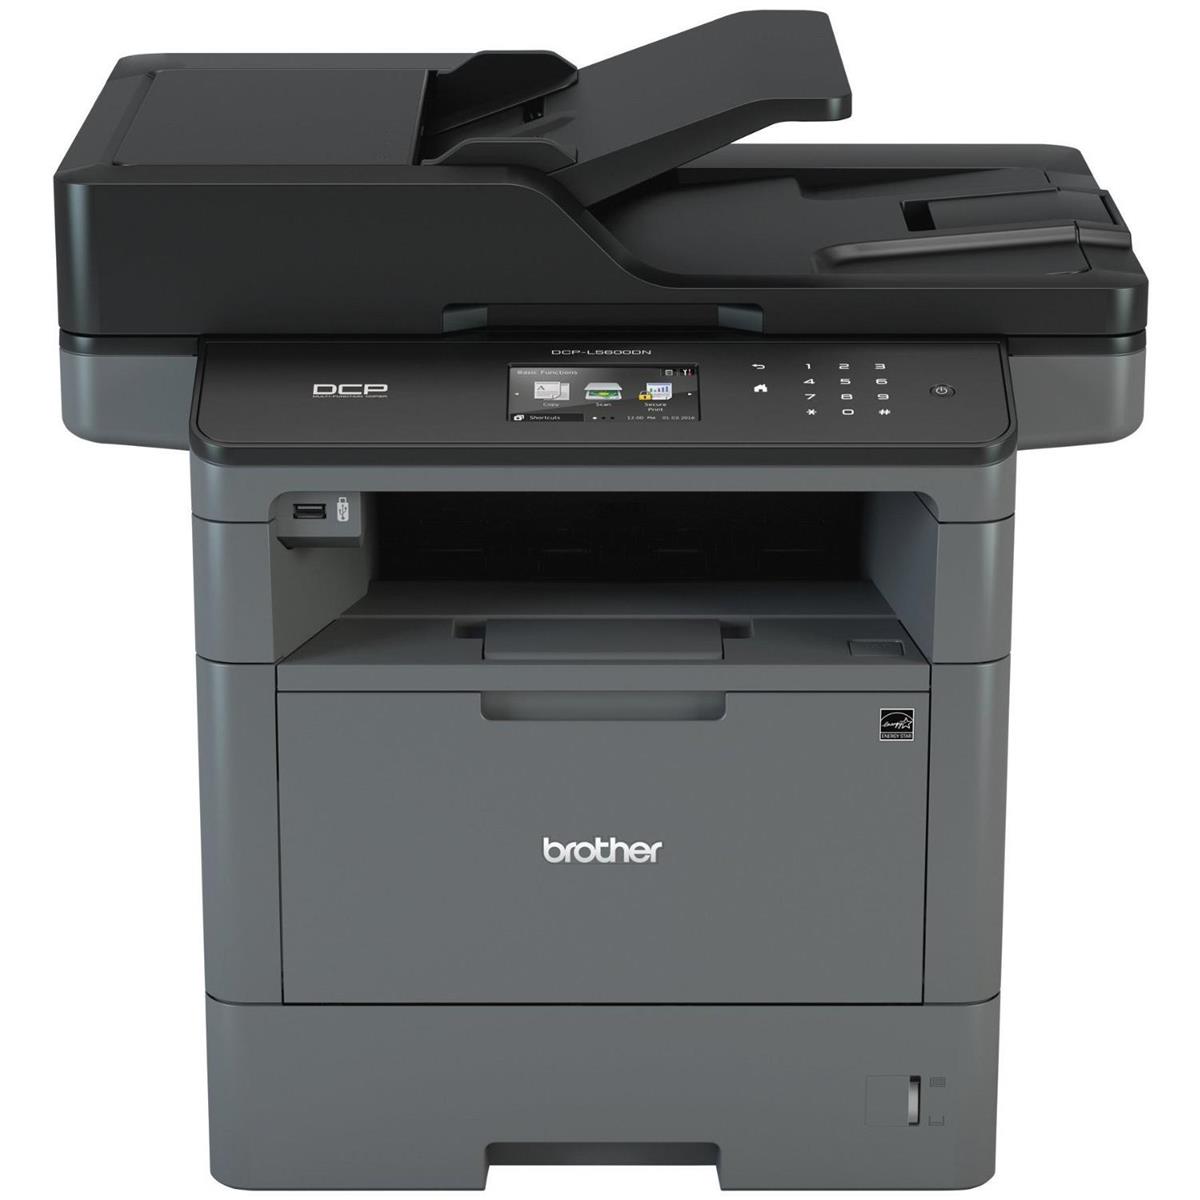 Image of Brother DCP-L5600DN Multi-Function Monochrome Laser Printer